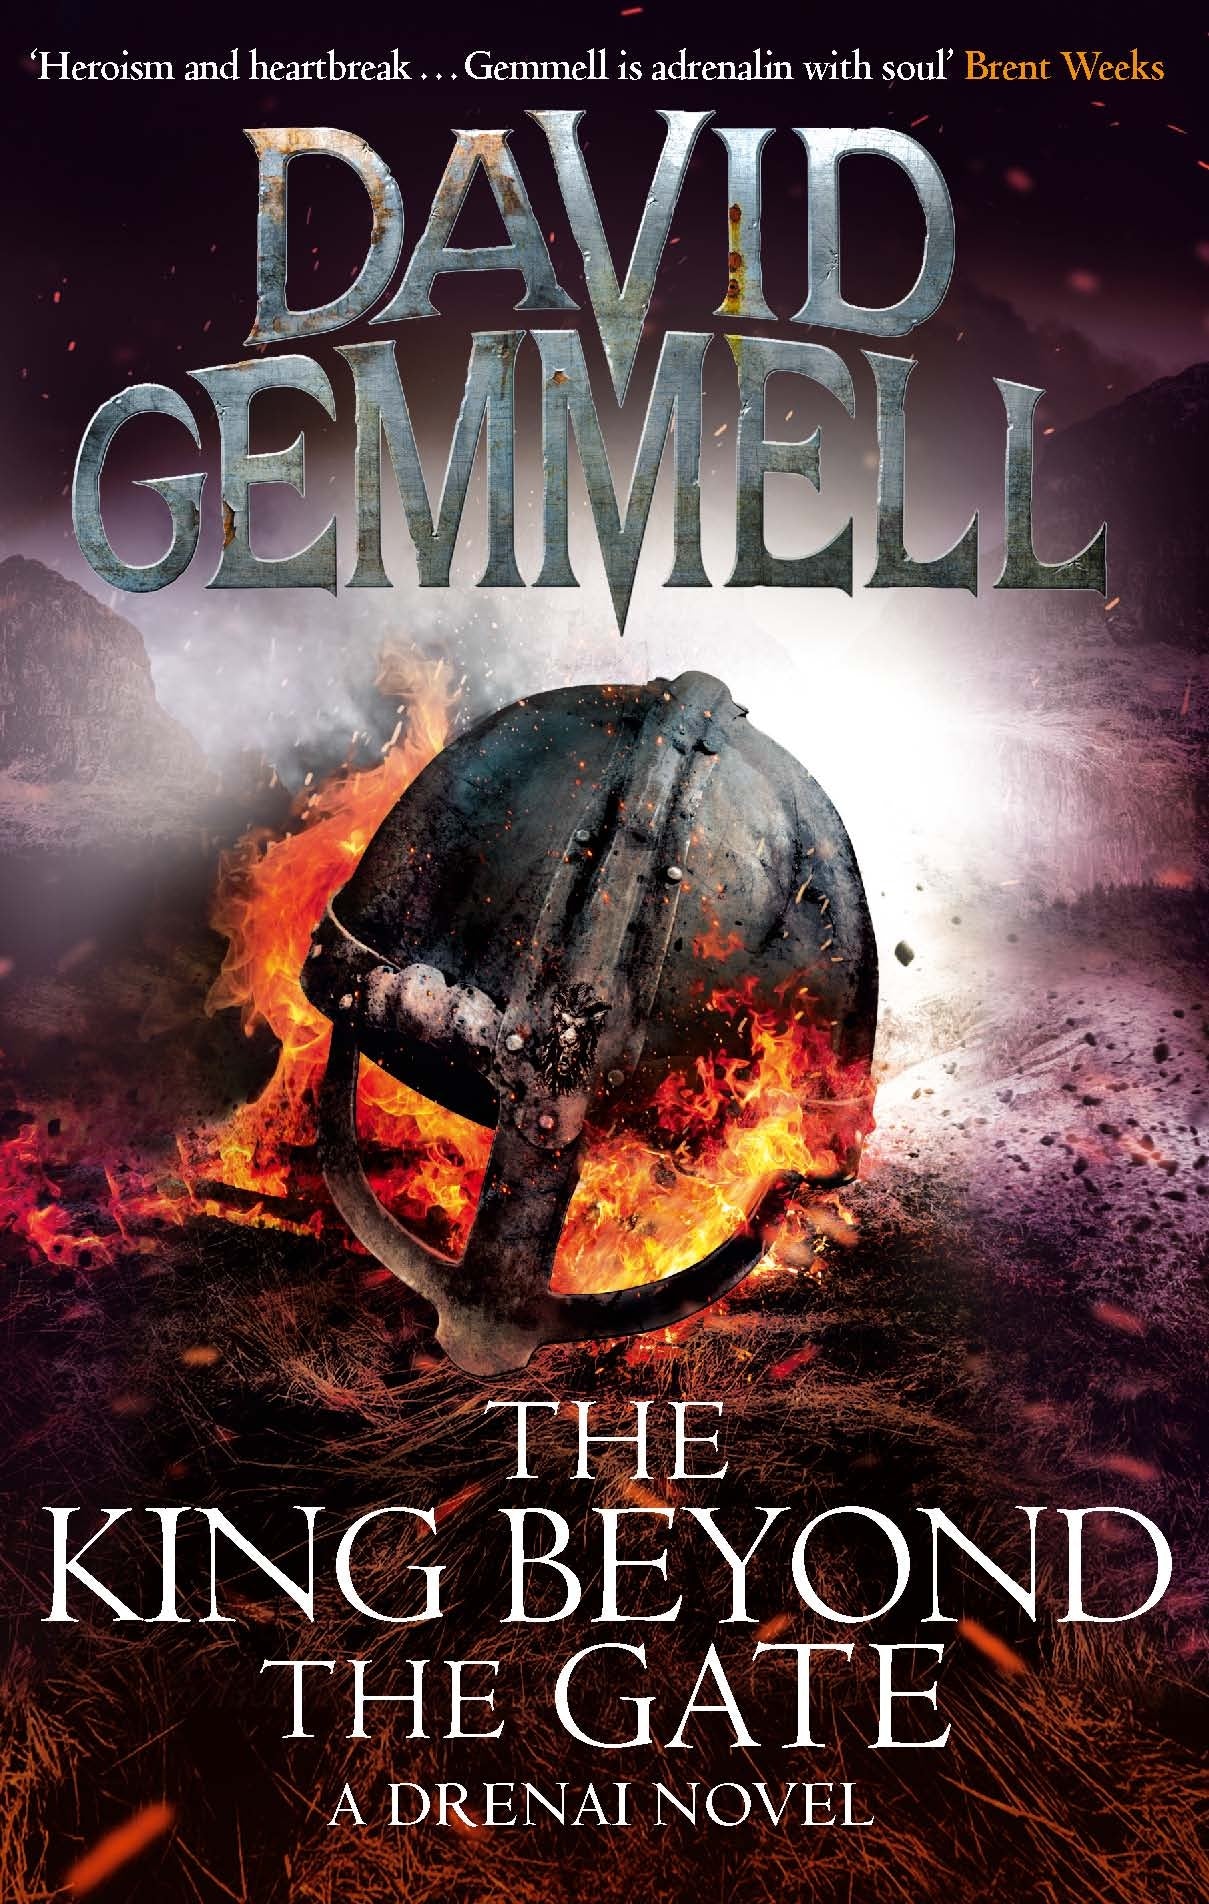 The King Beyond The Gate by David Gemmell